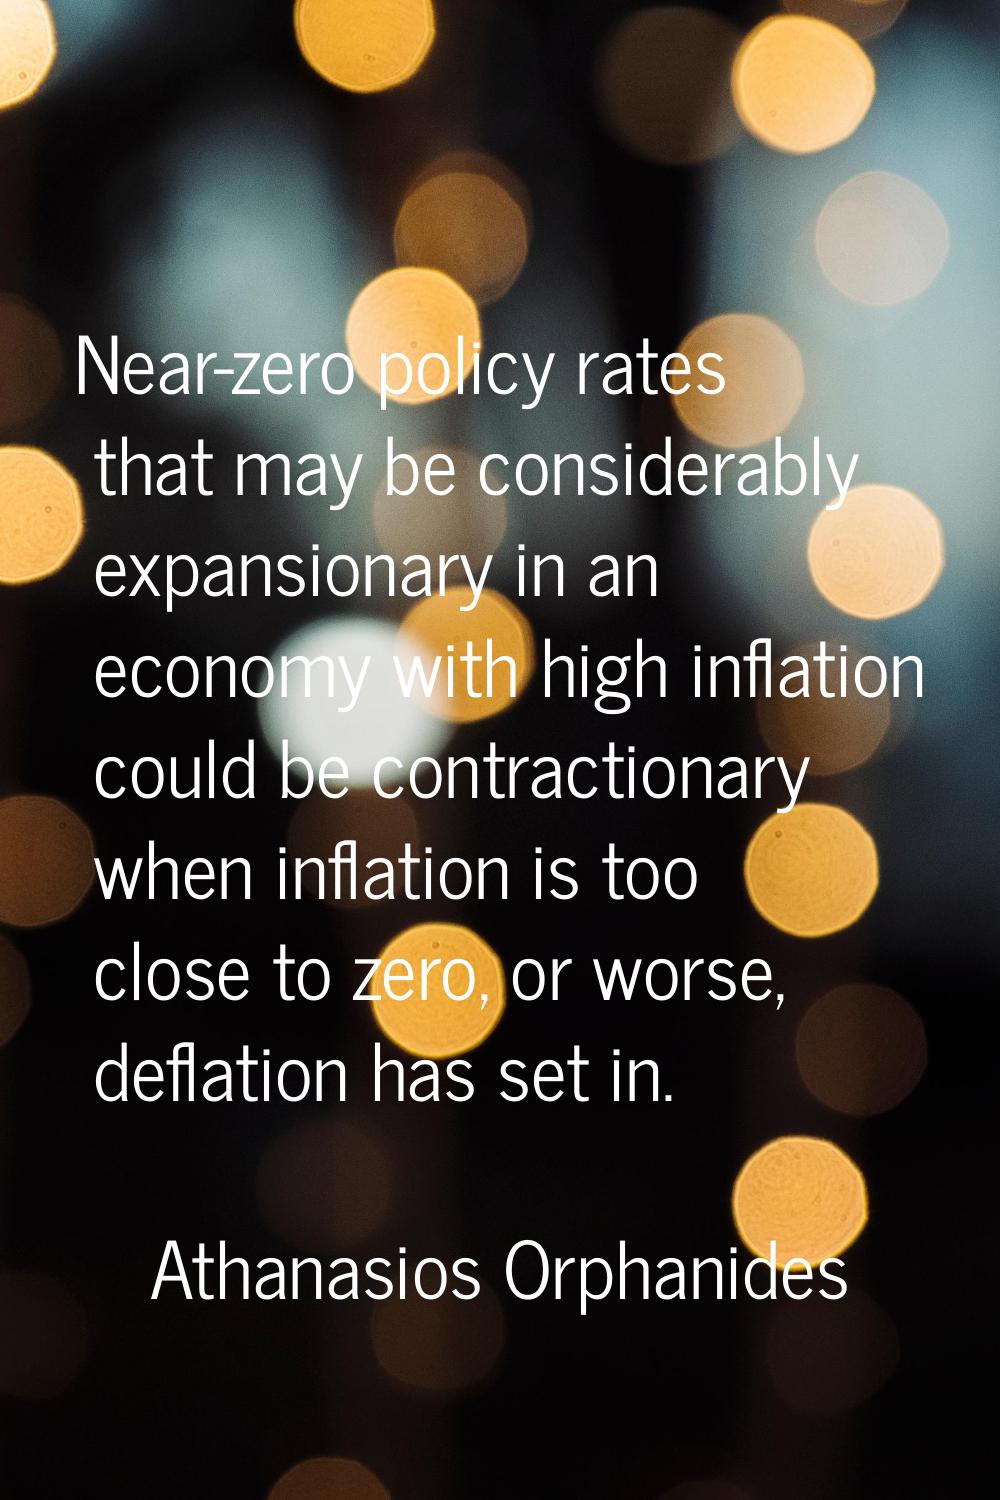 Near-zero policy rates that may be considerably expansionary in an economy with high inflation coul